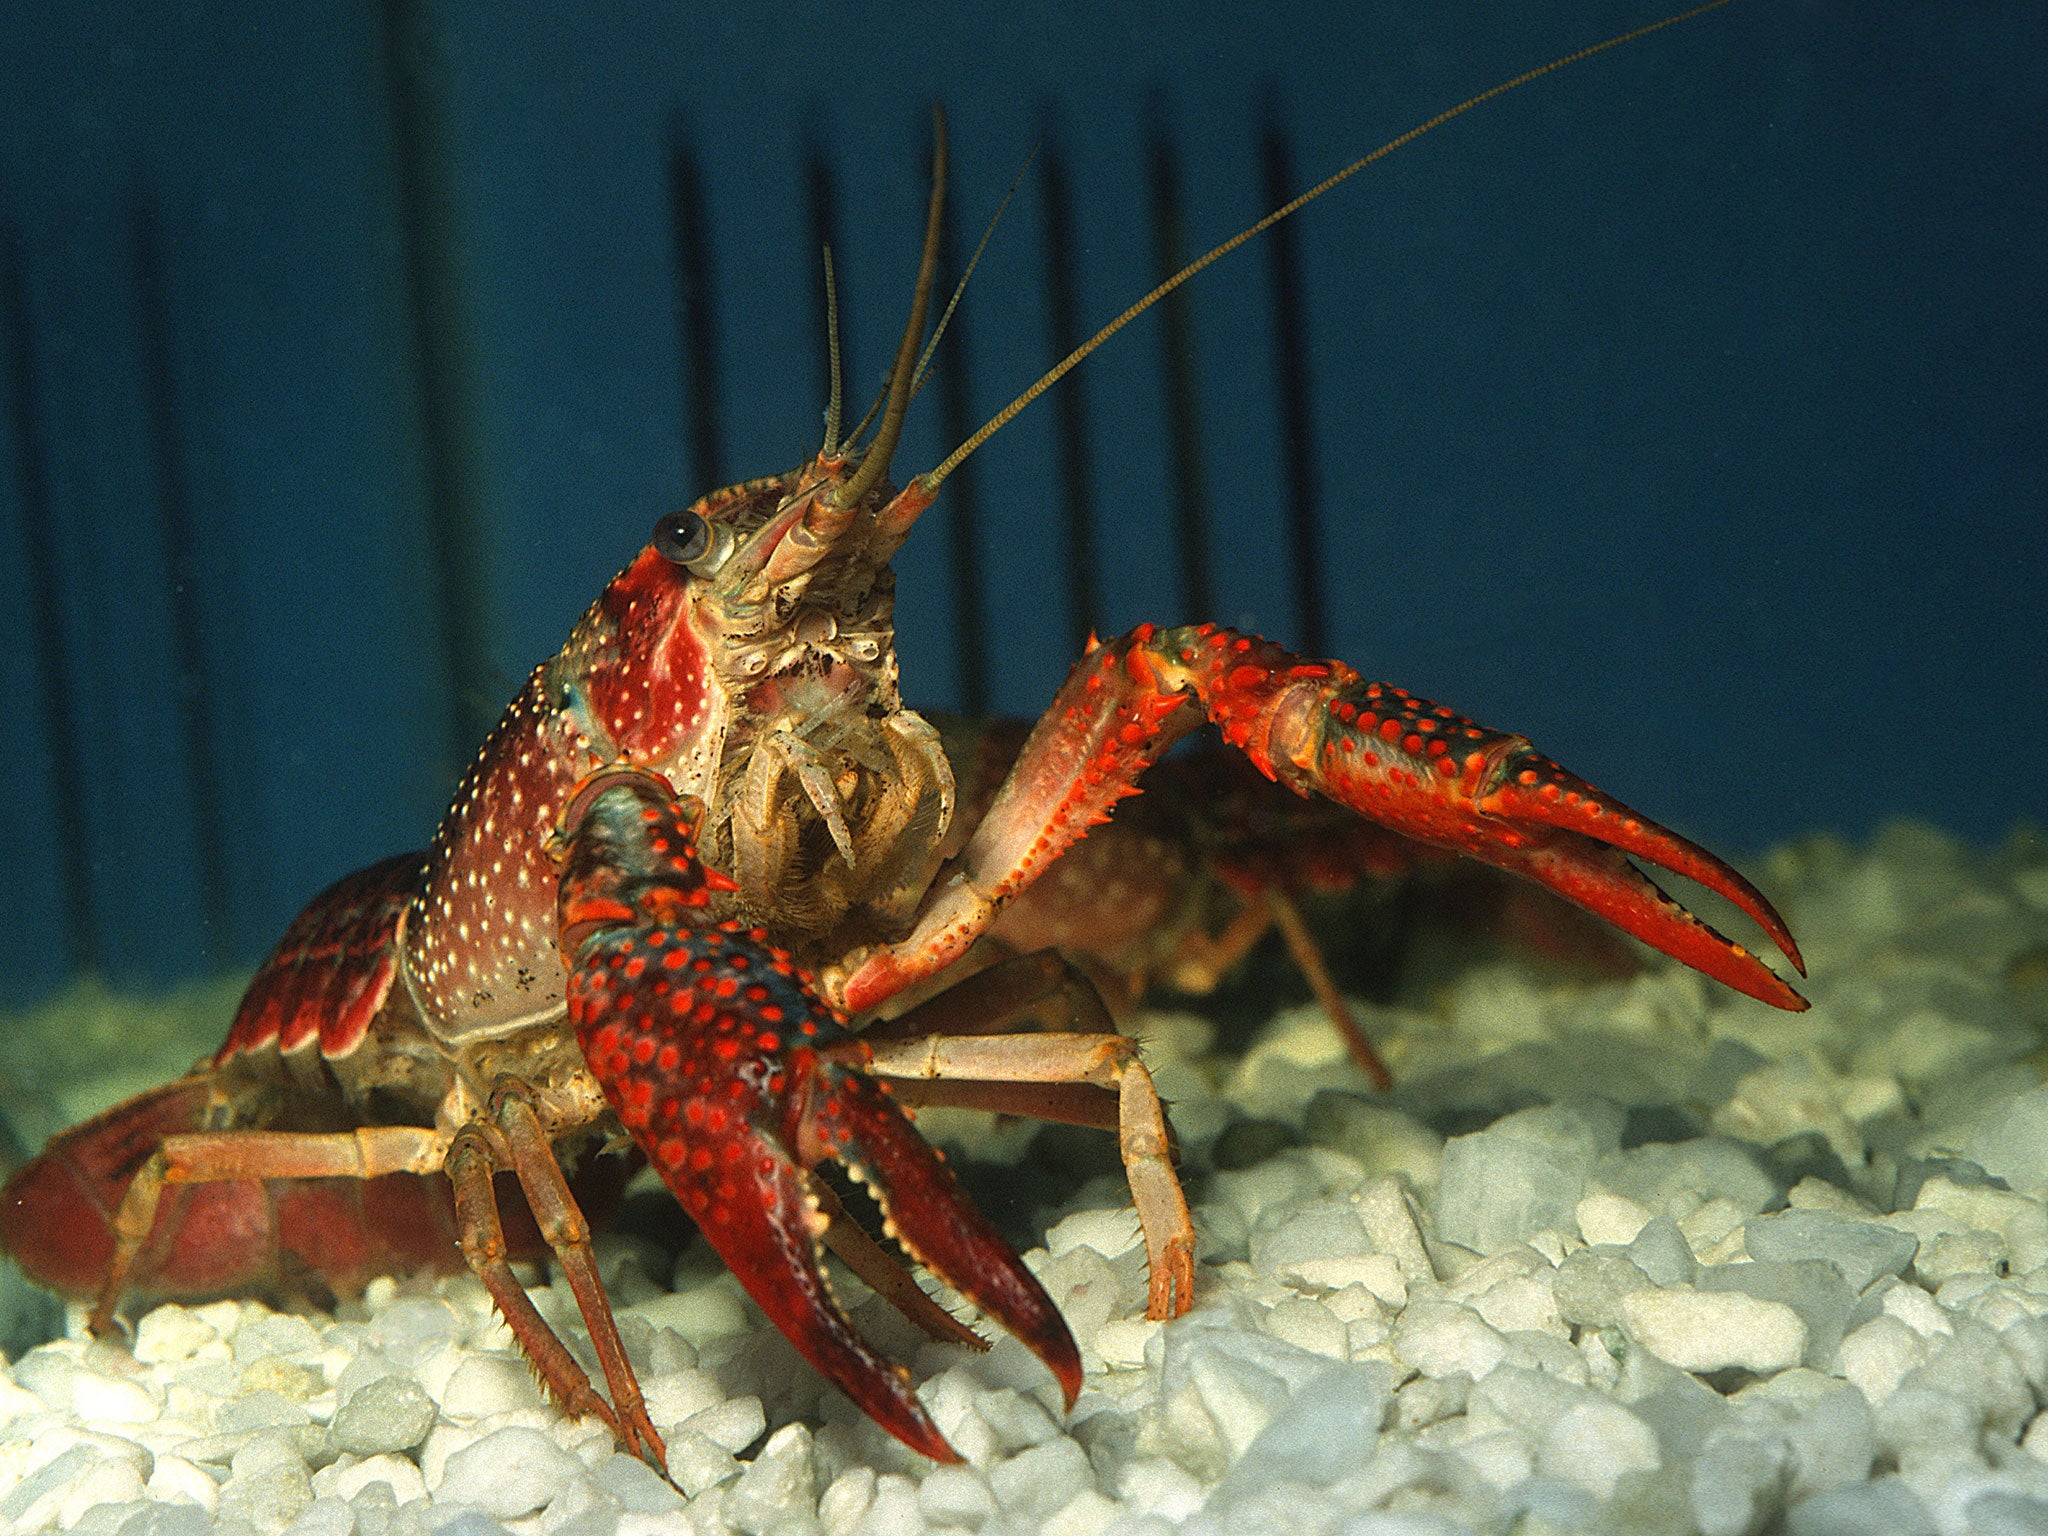 Anxiety research: Even crayfish get stressed, scientists show